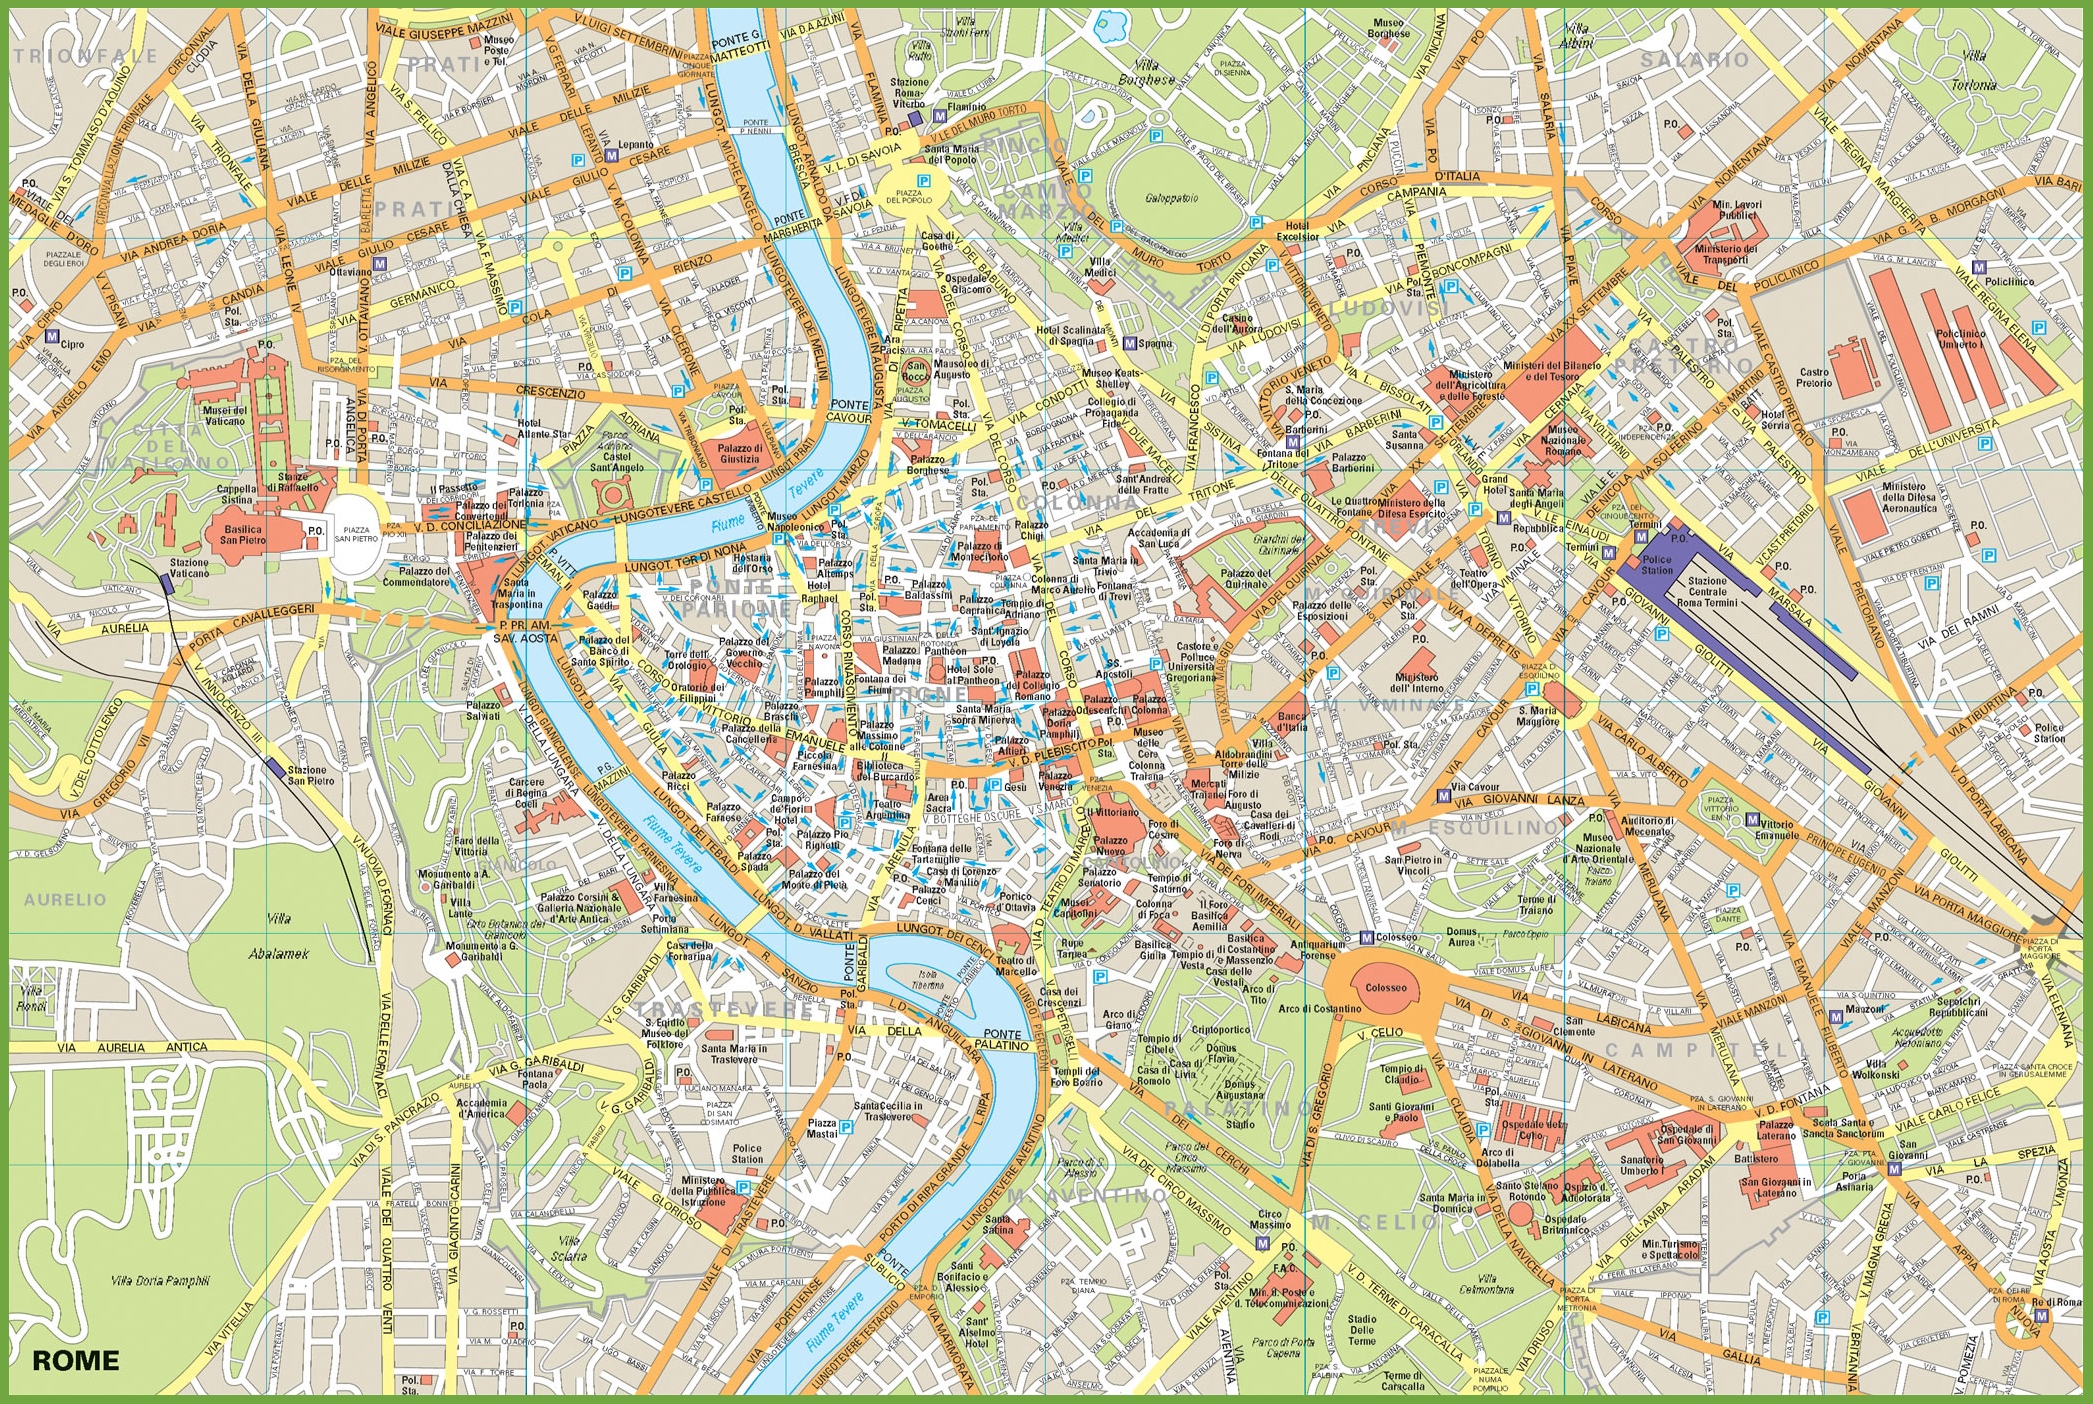 Sightseeing Map Of Rome Italy Large Rome Maps For Free Download And